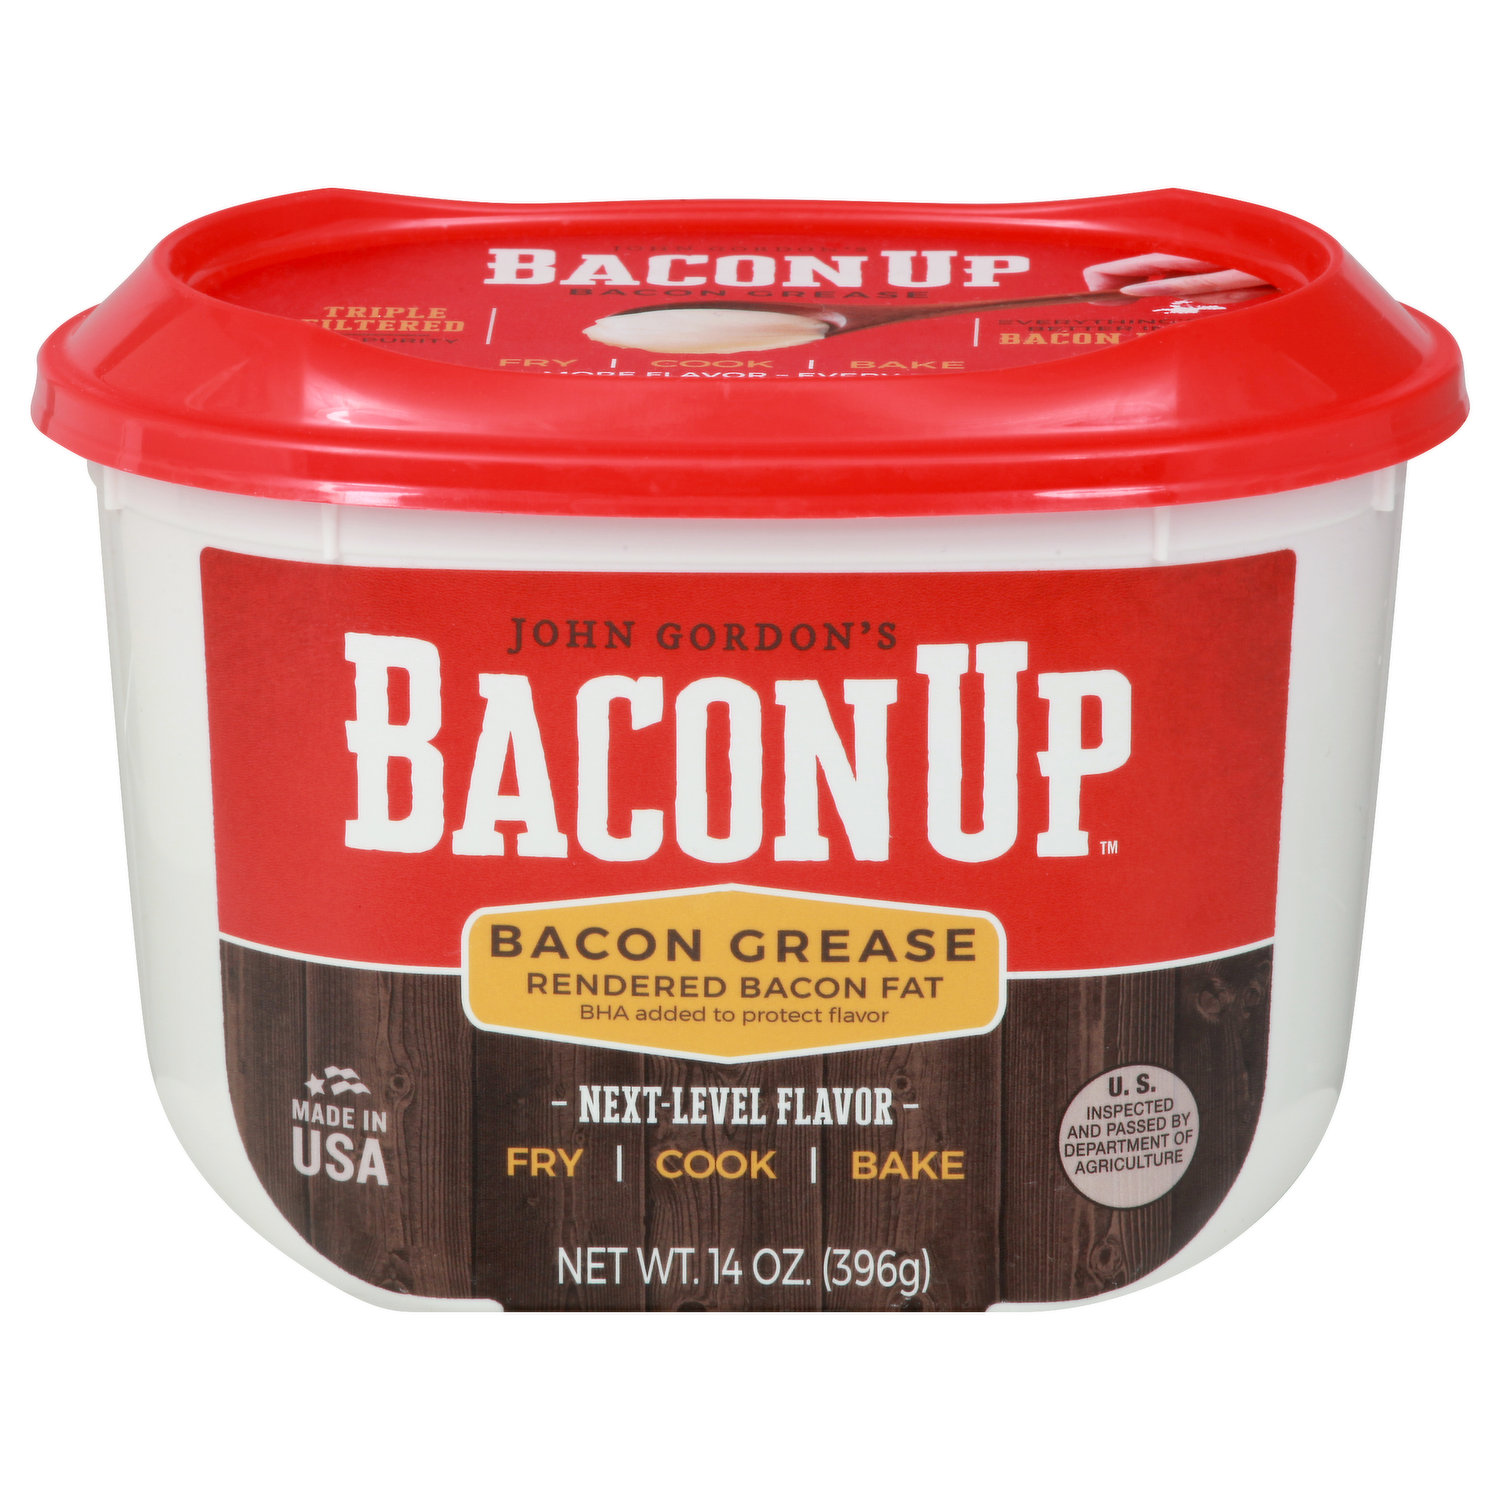 Better N Bacon LLC, distributors of Bacon Up bacon grease